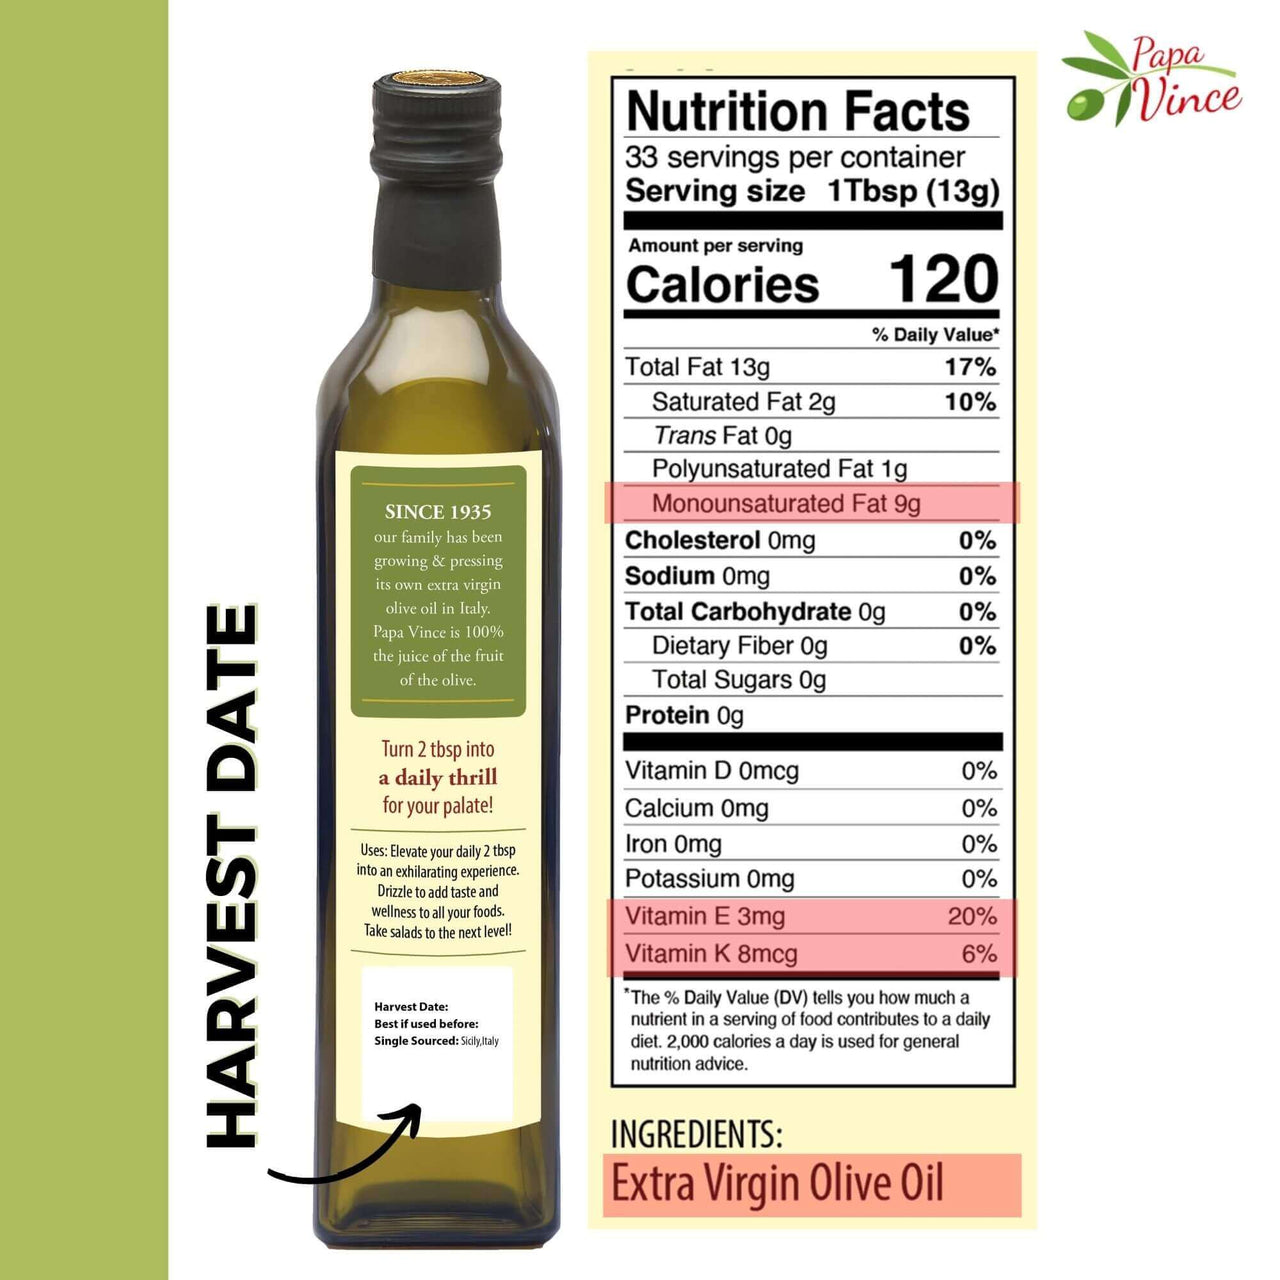 Papa Vince Olive Oil Extra Virgin - 3Bottles Save $13.00 with Subscription - Papa Vinc